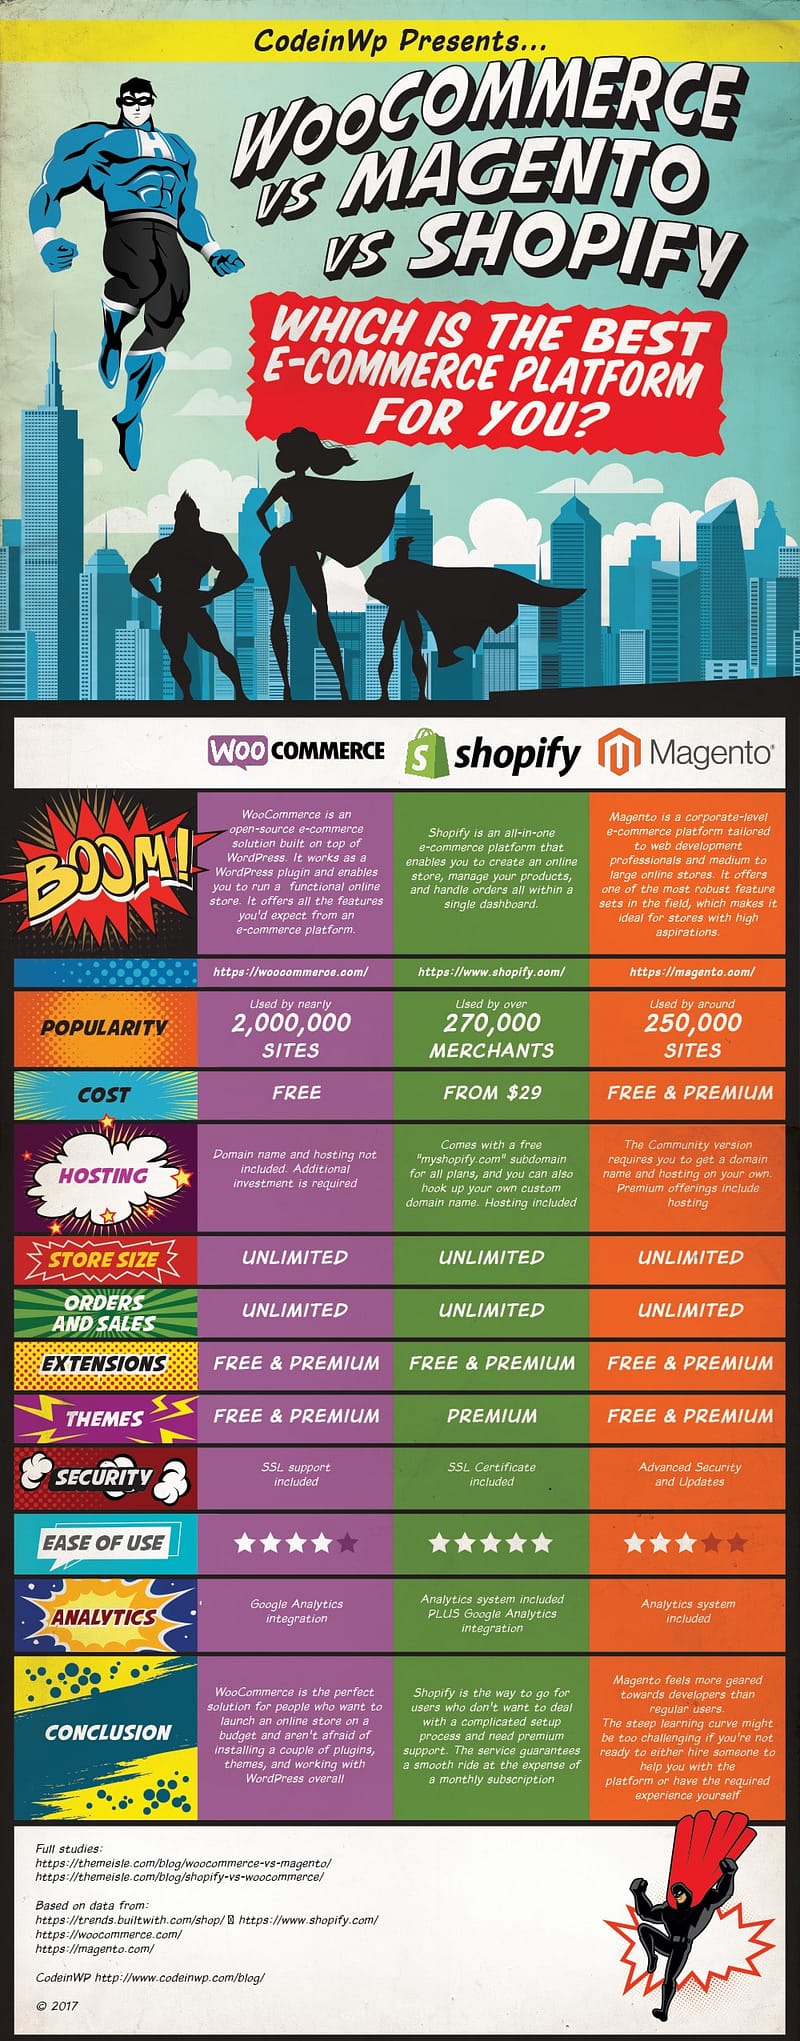 INFOGRAPHIC: WooCommerce vs Magento vs Shopify by CodeinWP.com